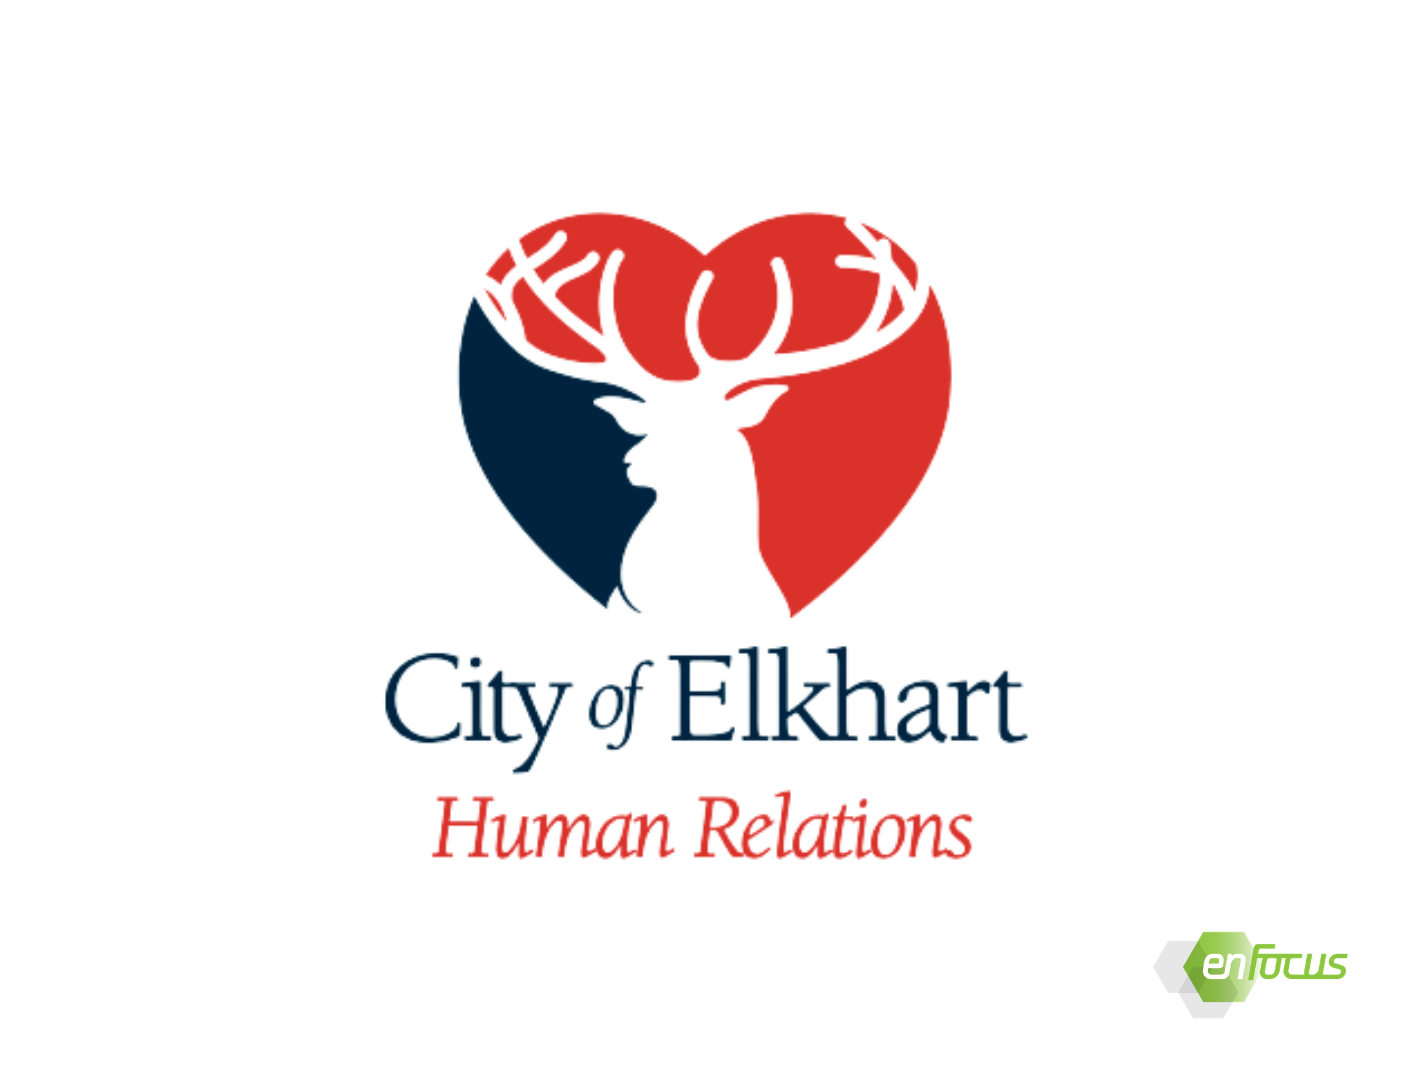 Elkhart Human Relations Commission Draws on enFocus Design Expertise to Develop Fair Housing Campaign